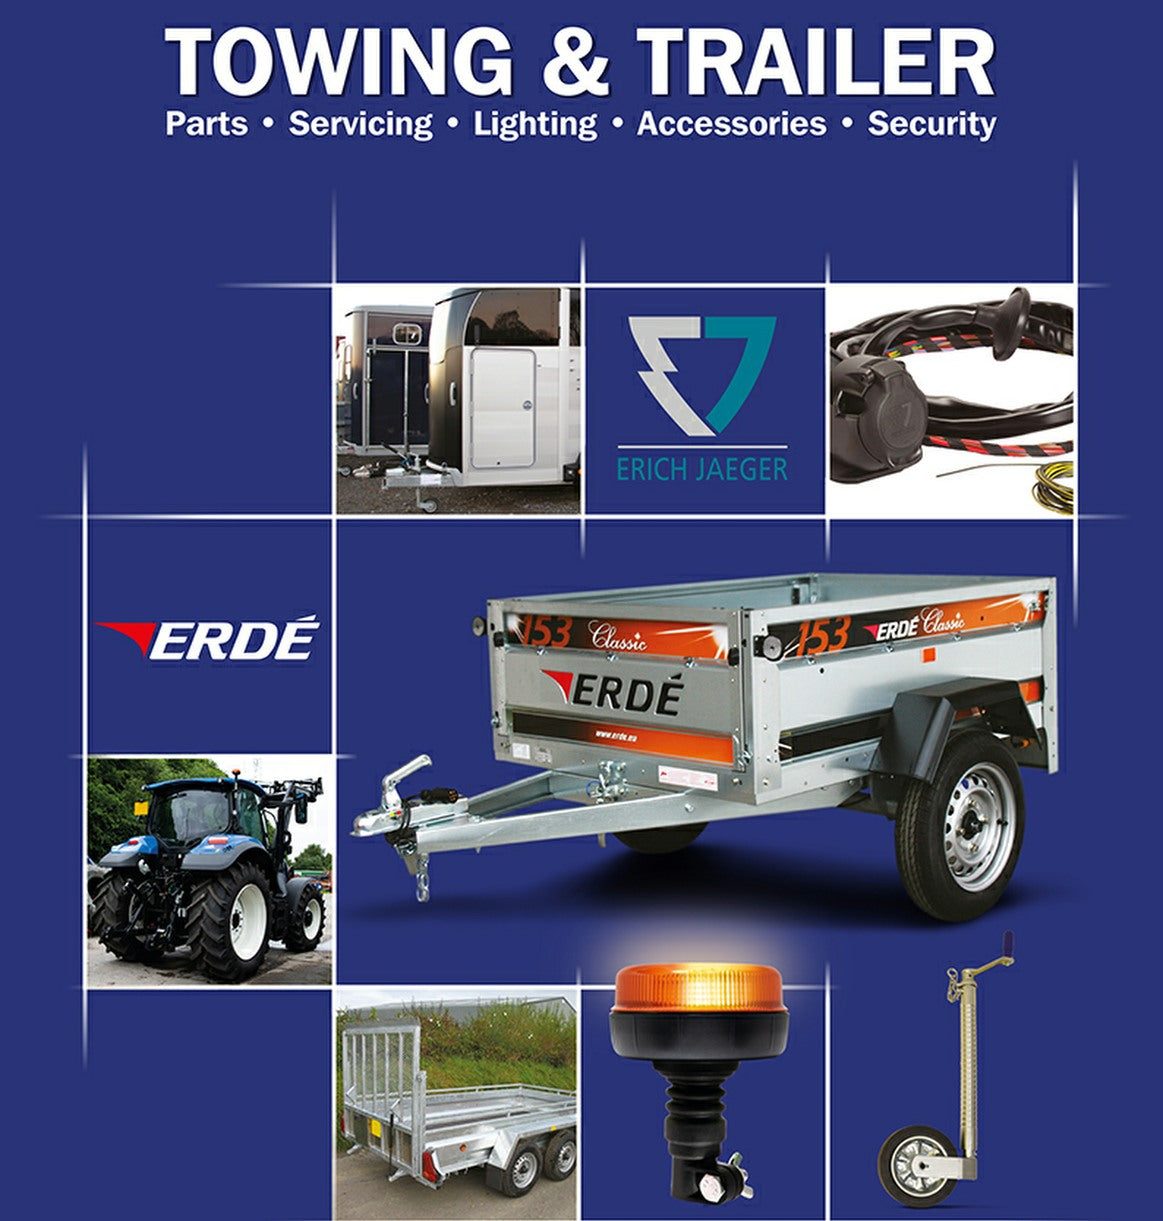 Towing & Leisure products for your camper, caravan, trailer or